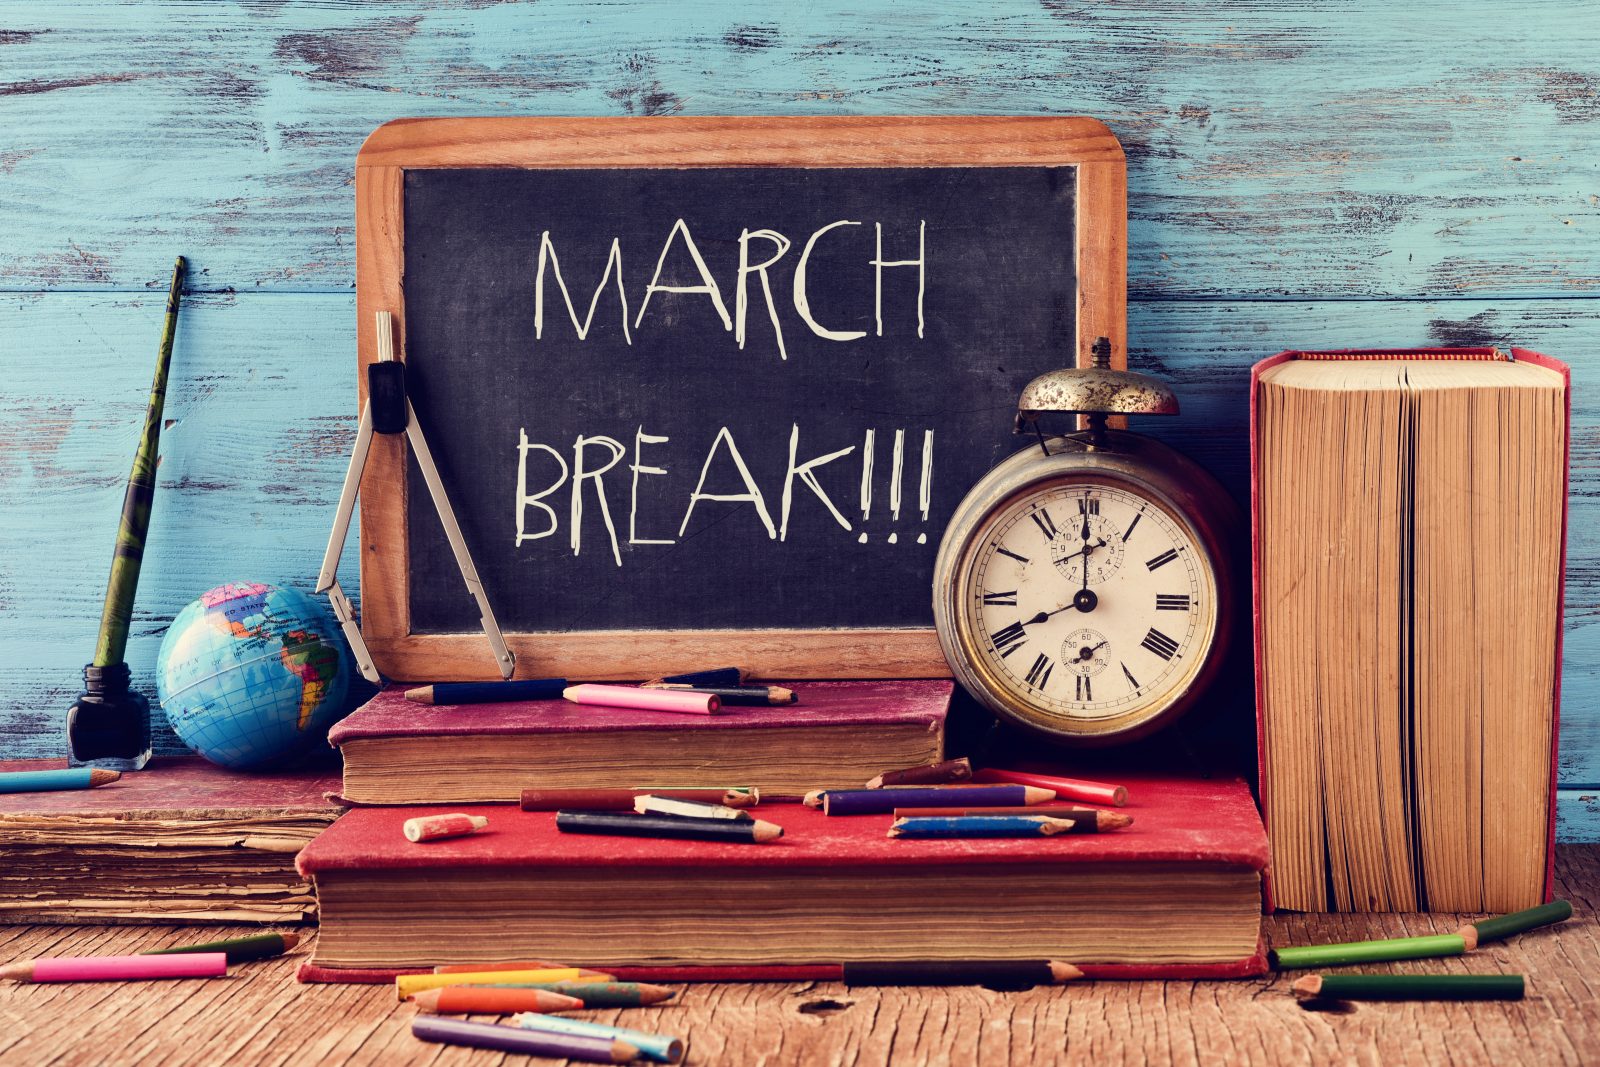 5 ideas for families to make the most of staying home this March Break